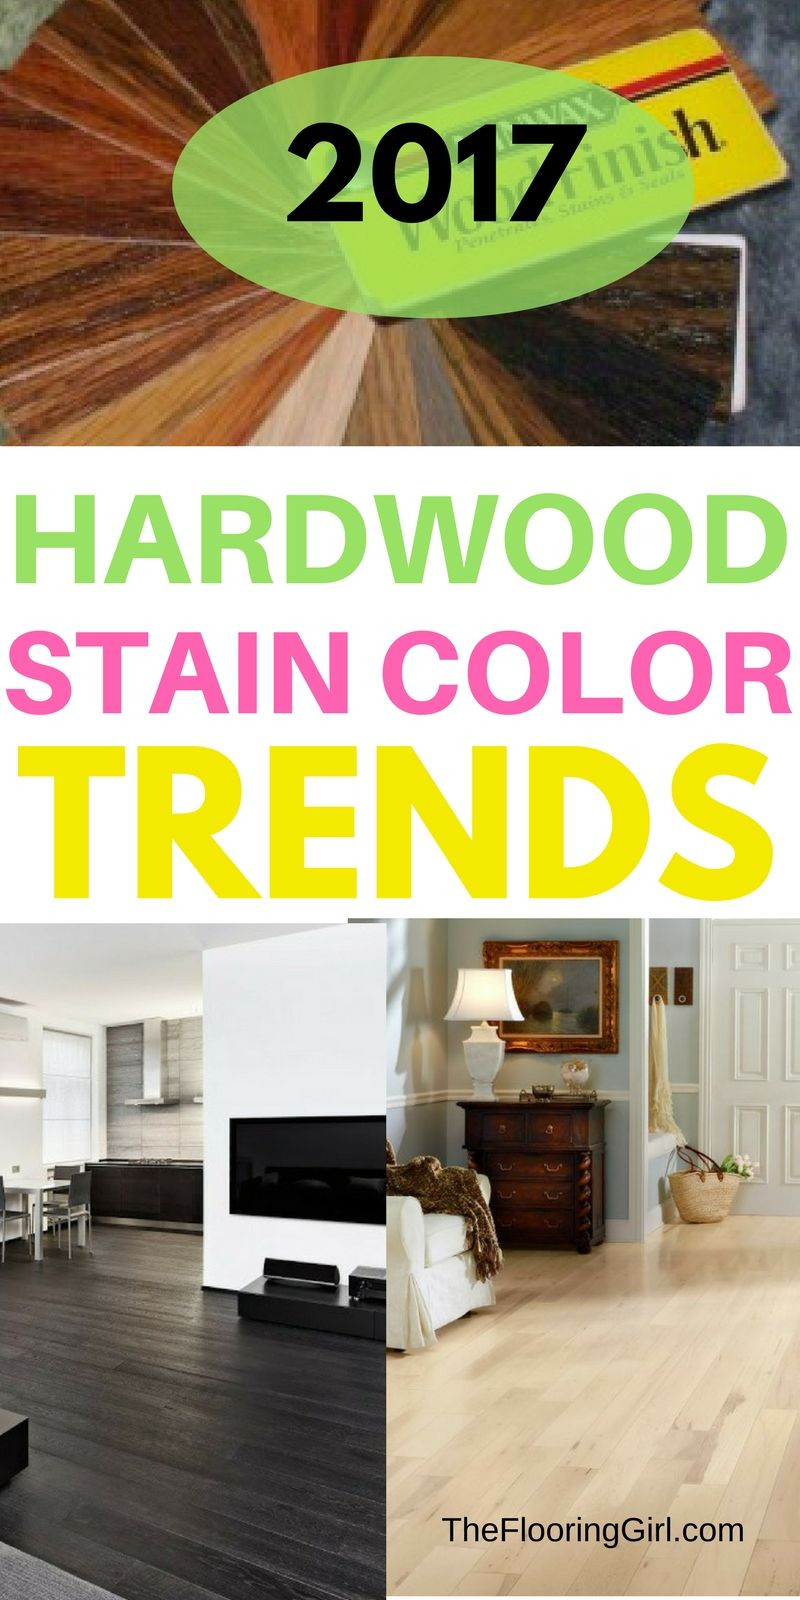 15 Wonderful How to Refinish Hardwood Floors Cost 2024 free download how to refinish hardwood floors cost of hardwood flooring stain color trends 2018 more from the flooring pertaining to hardwood flooring stain color trends for 2017 hardwood colors that are 